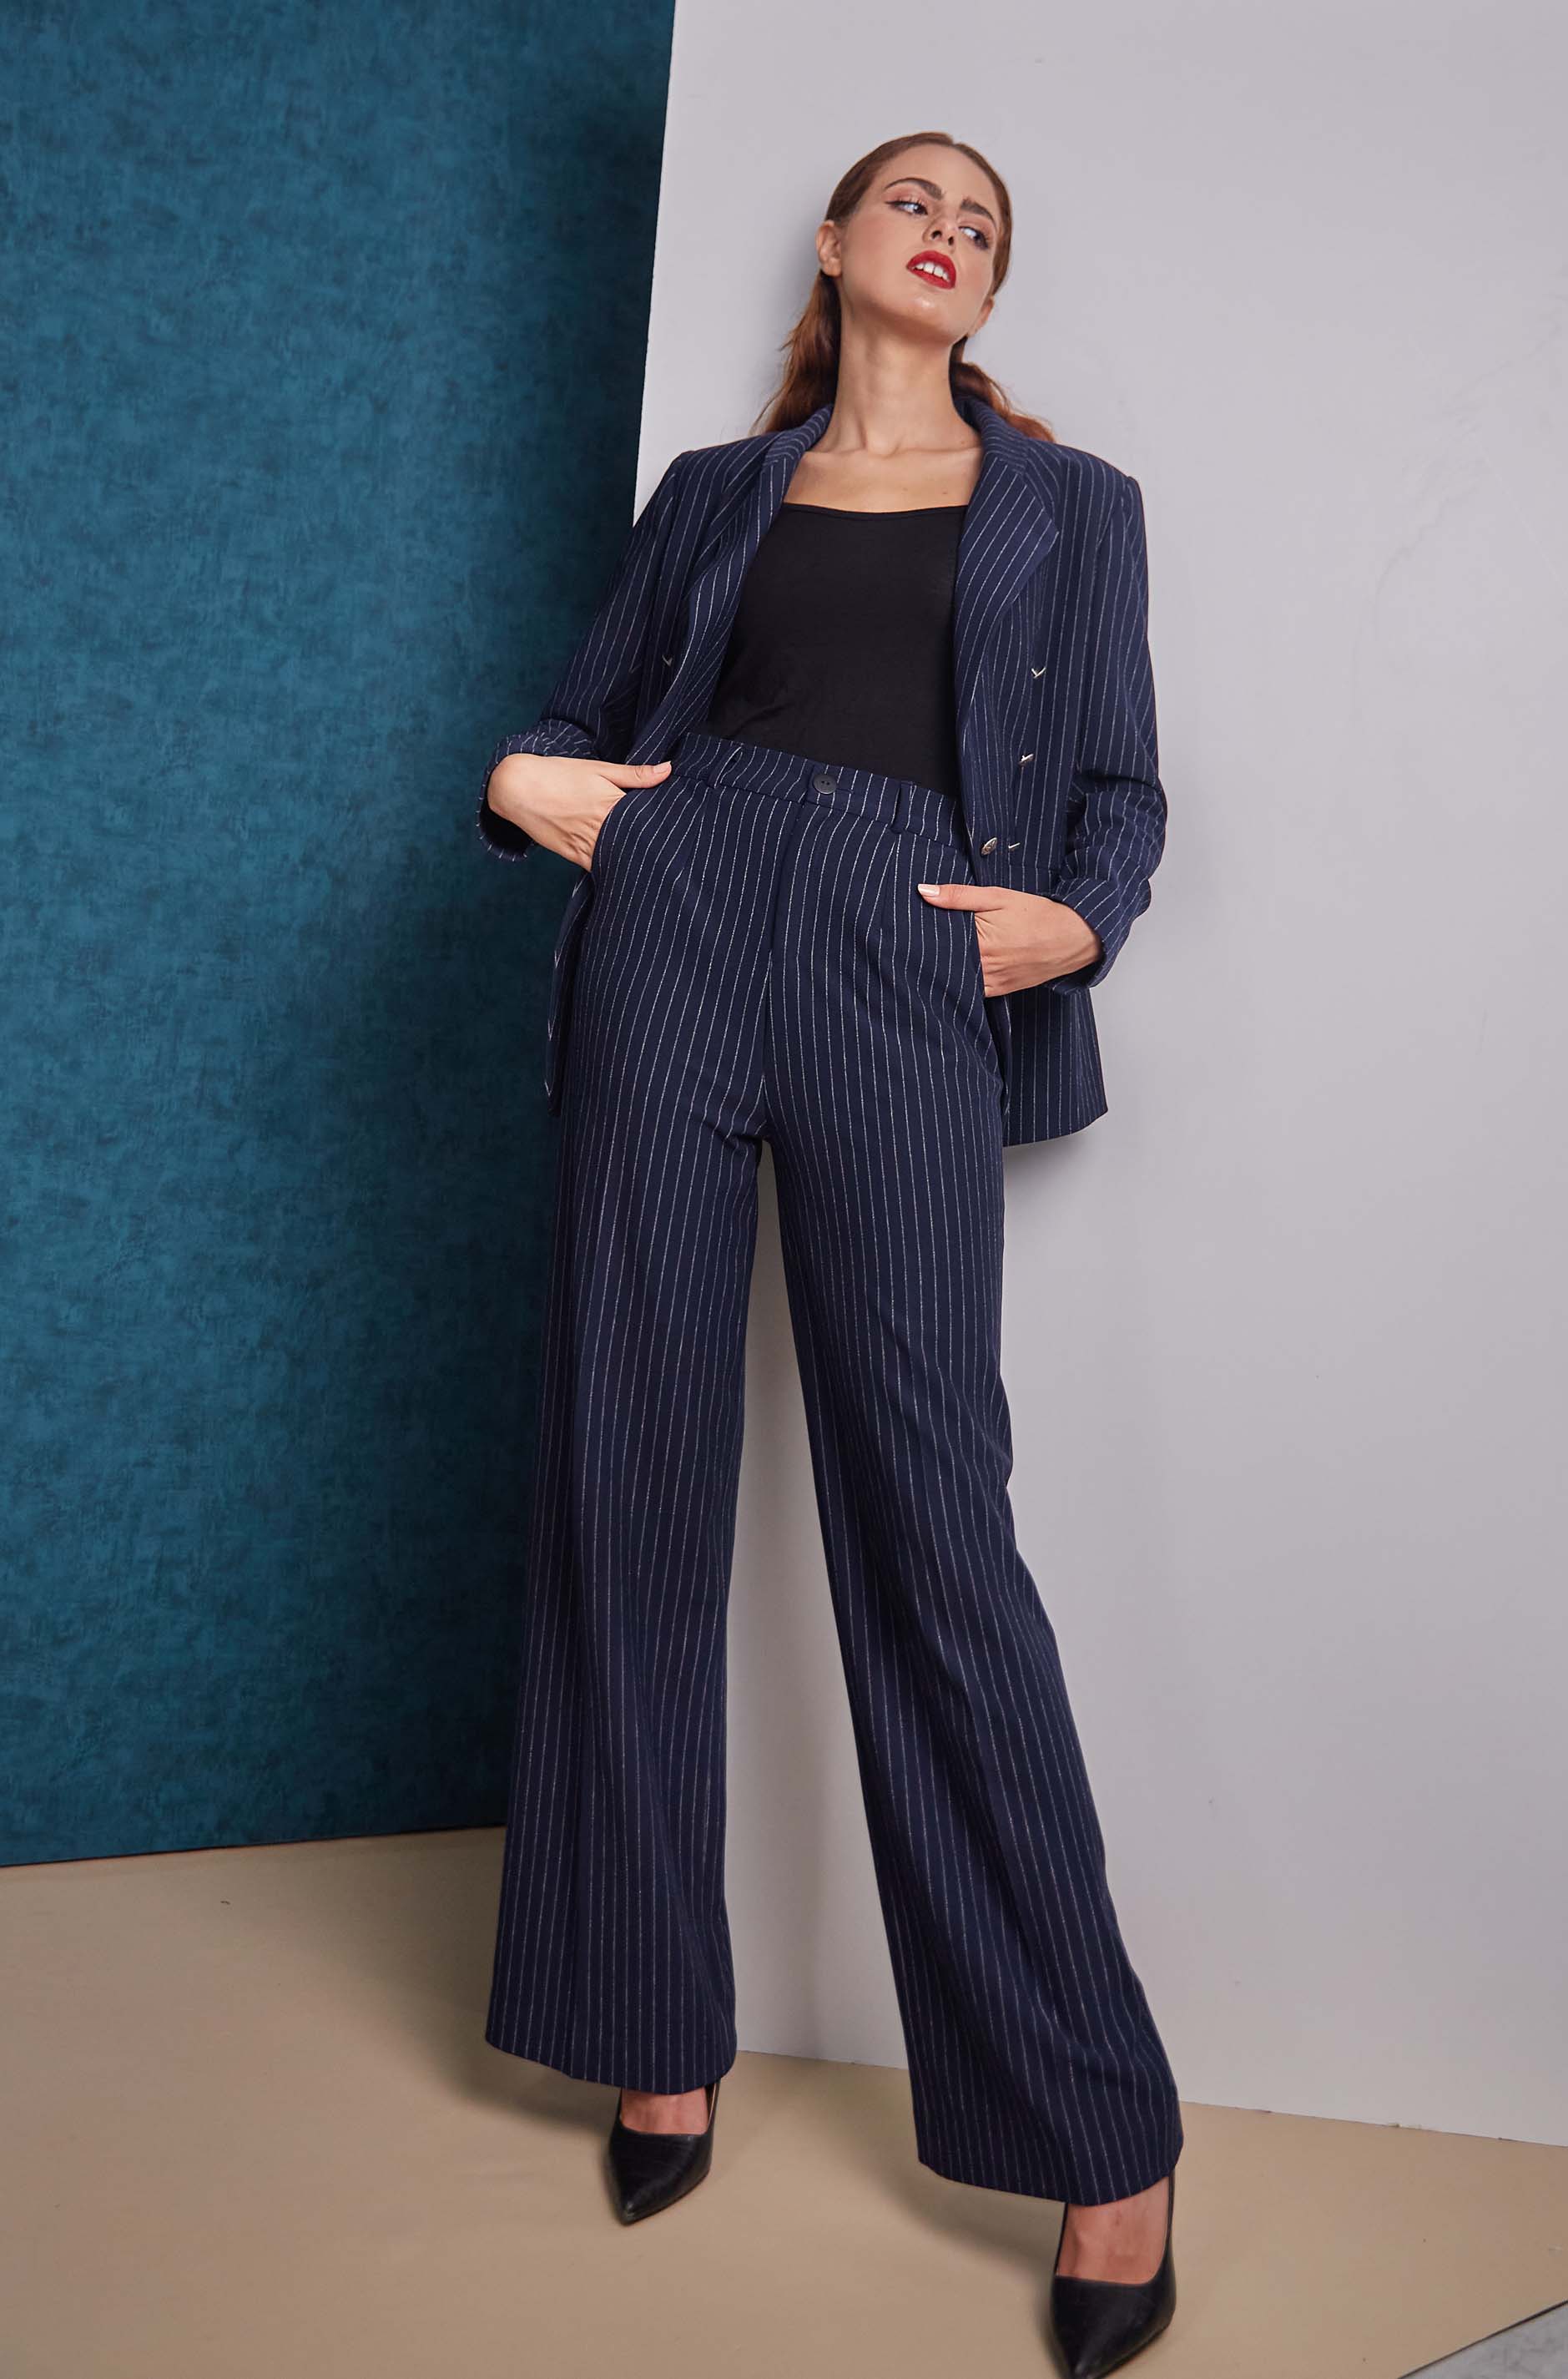 Pinstriped double breasted blue blazer and blue pant look